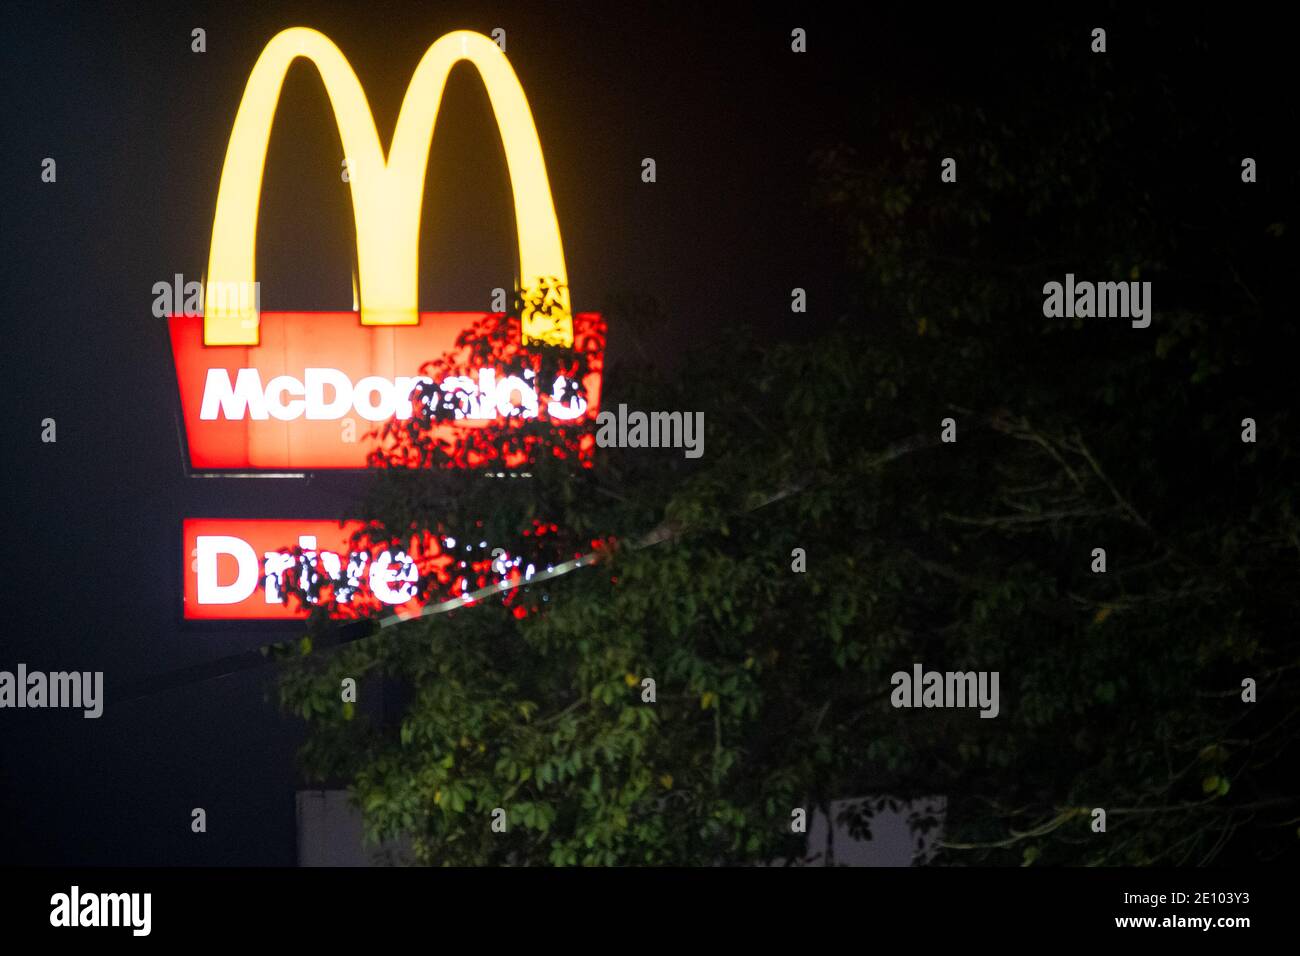 Lit Mcdonalds golden arches shot through trees against the night sky showing this famous fast food franchise in India Stock Photo